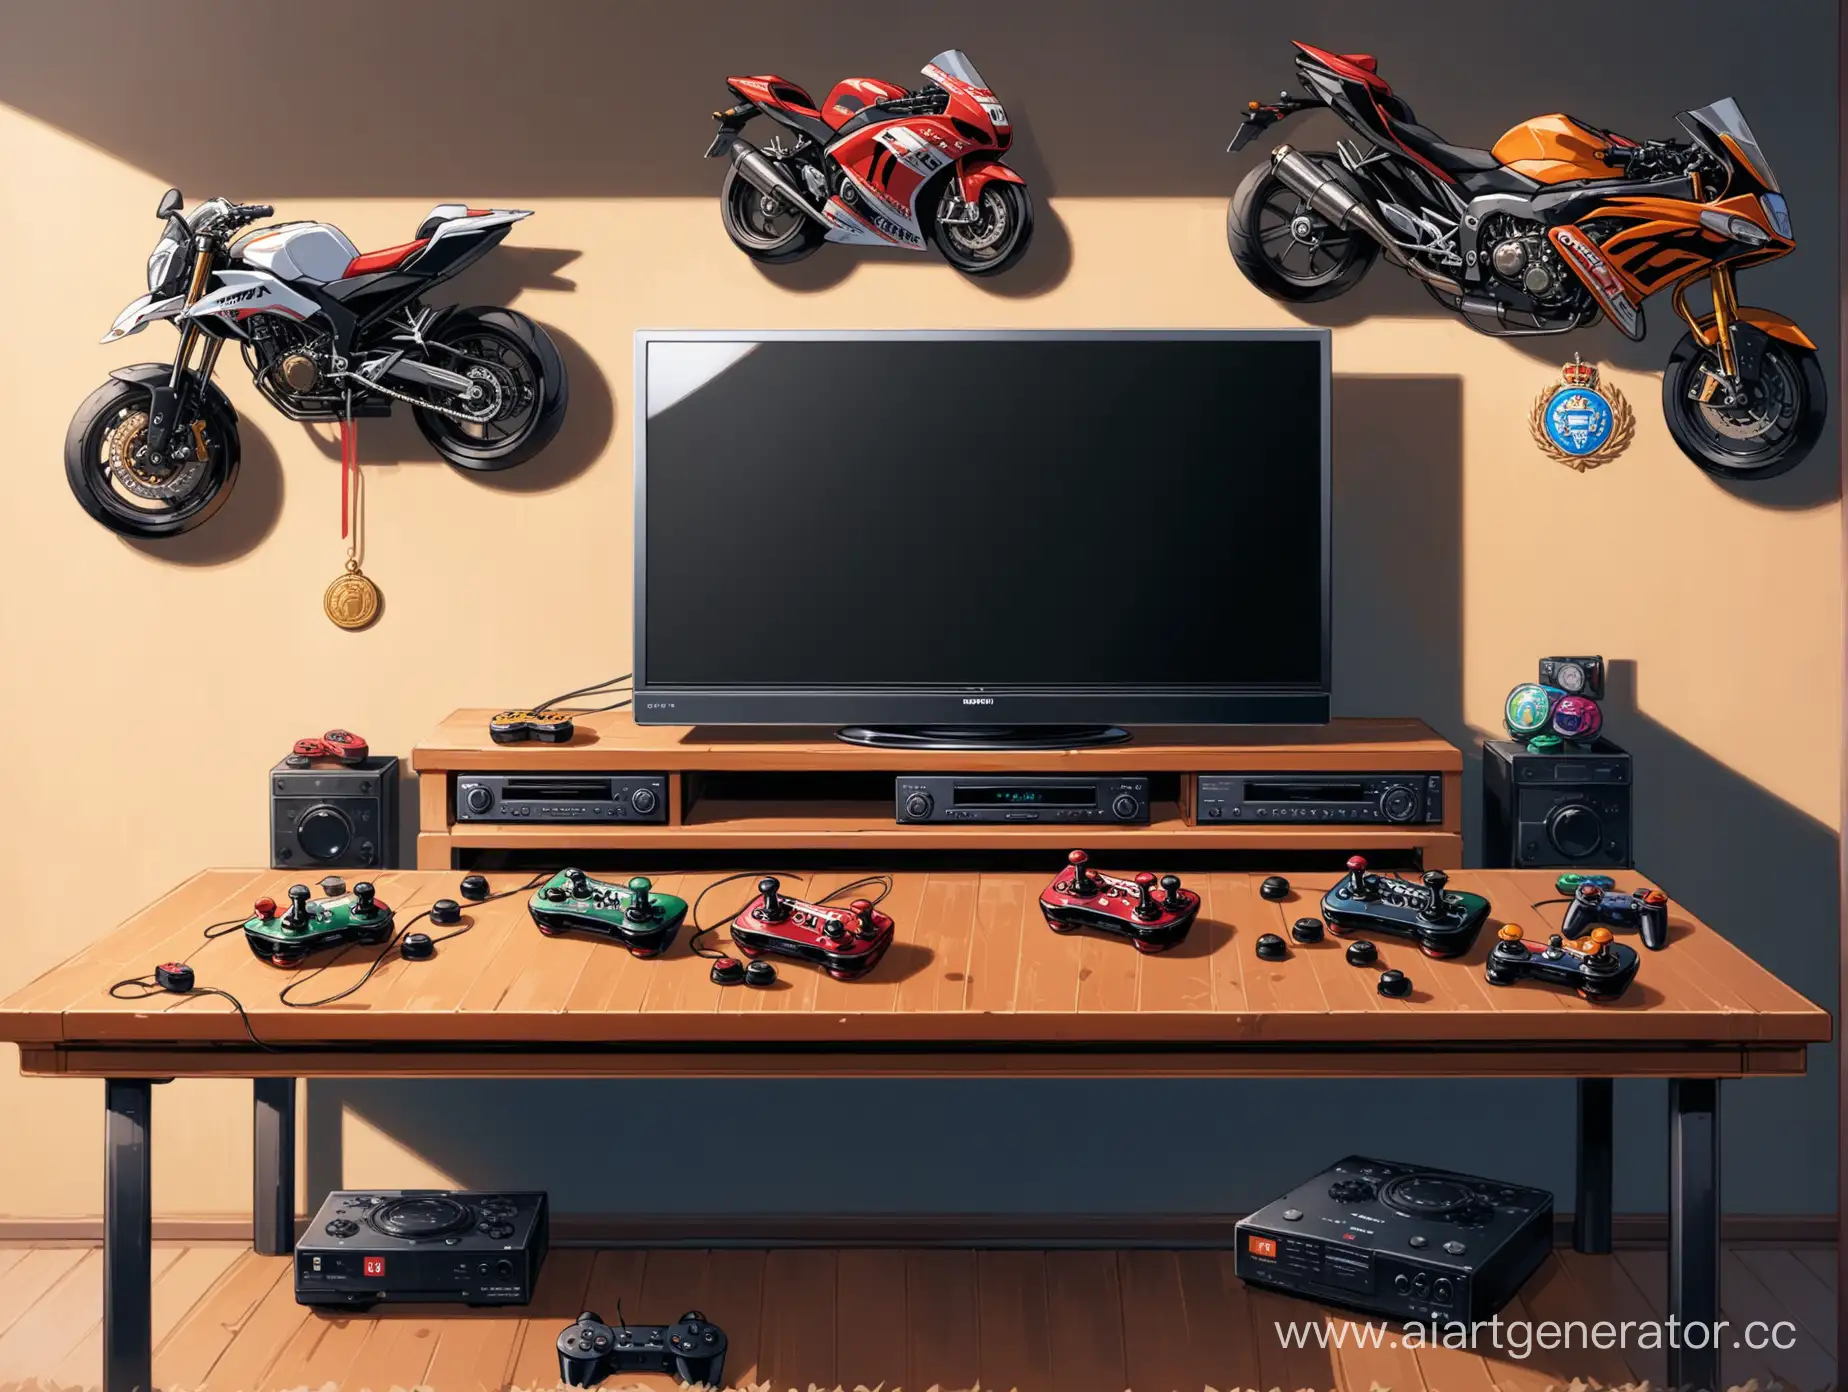 Intense-Motorcycle-Racing-on-TV-with-Joysticks-and-a-Medal